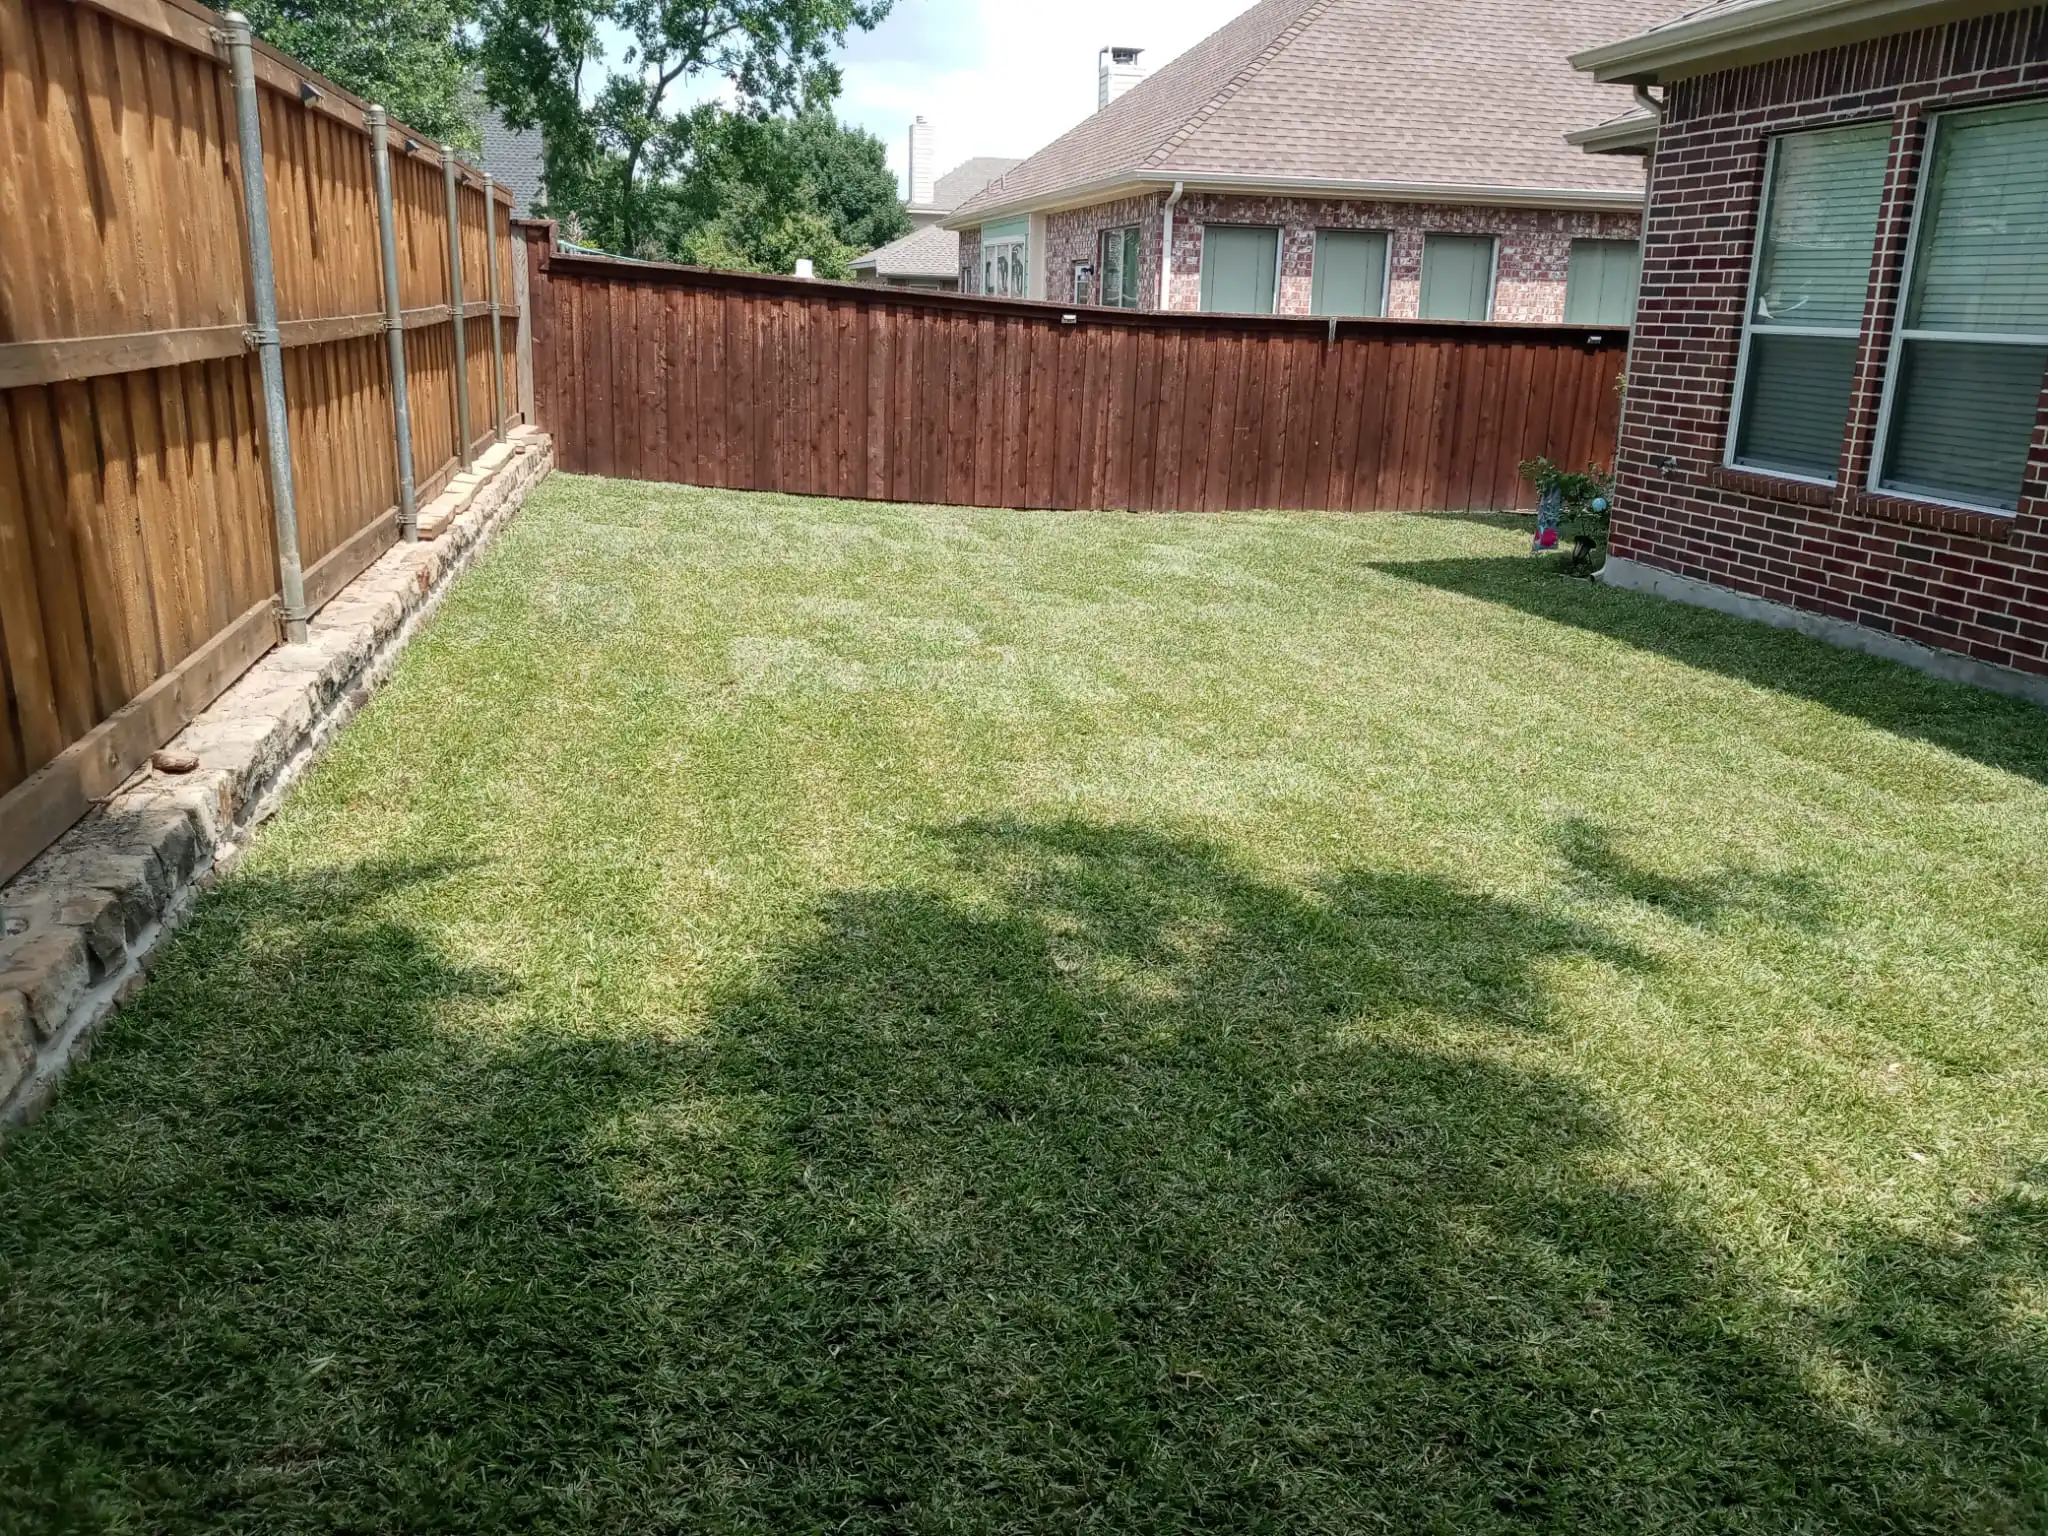 From Dull to Lush: How Liquid Aeration Benefits Your Collin County, TX Lawn